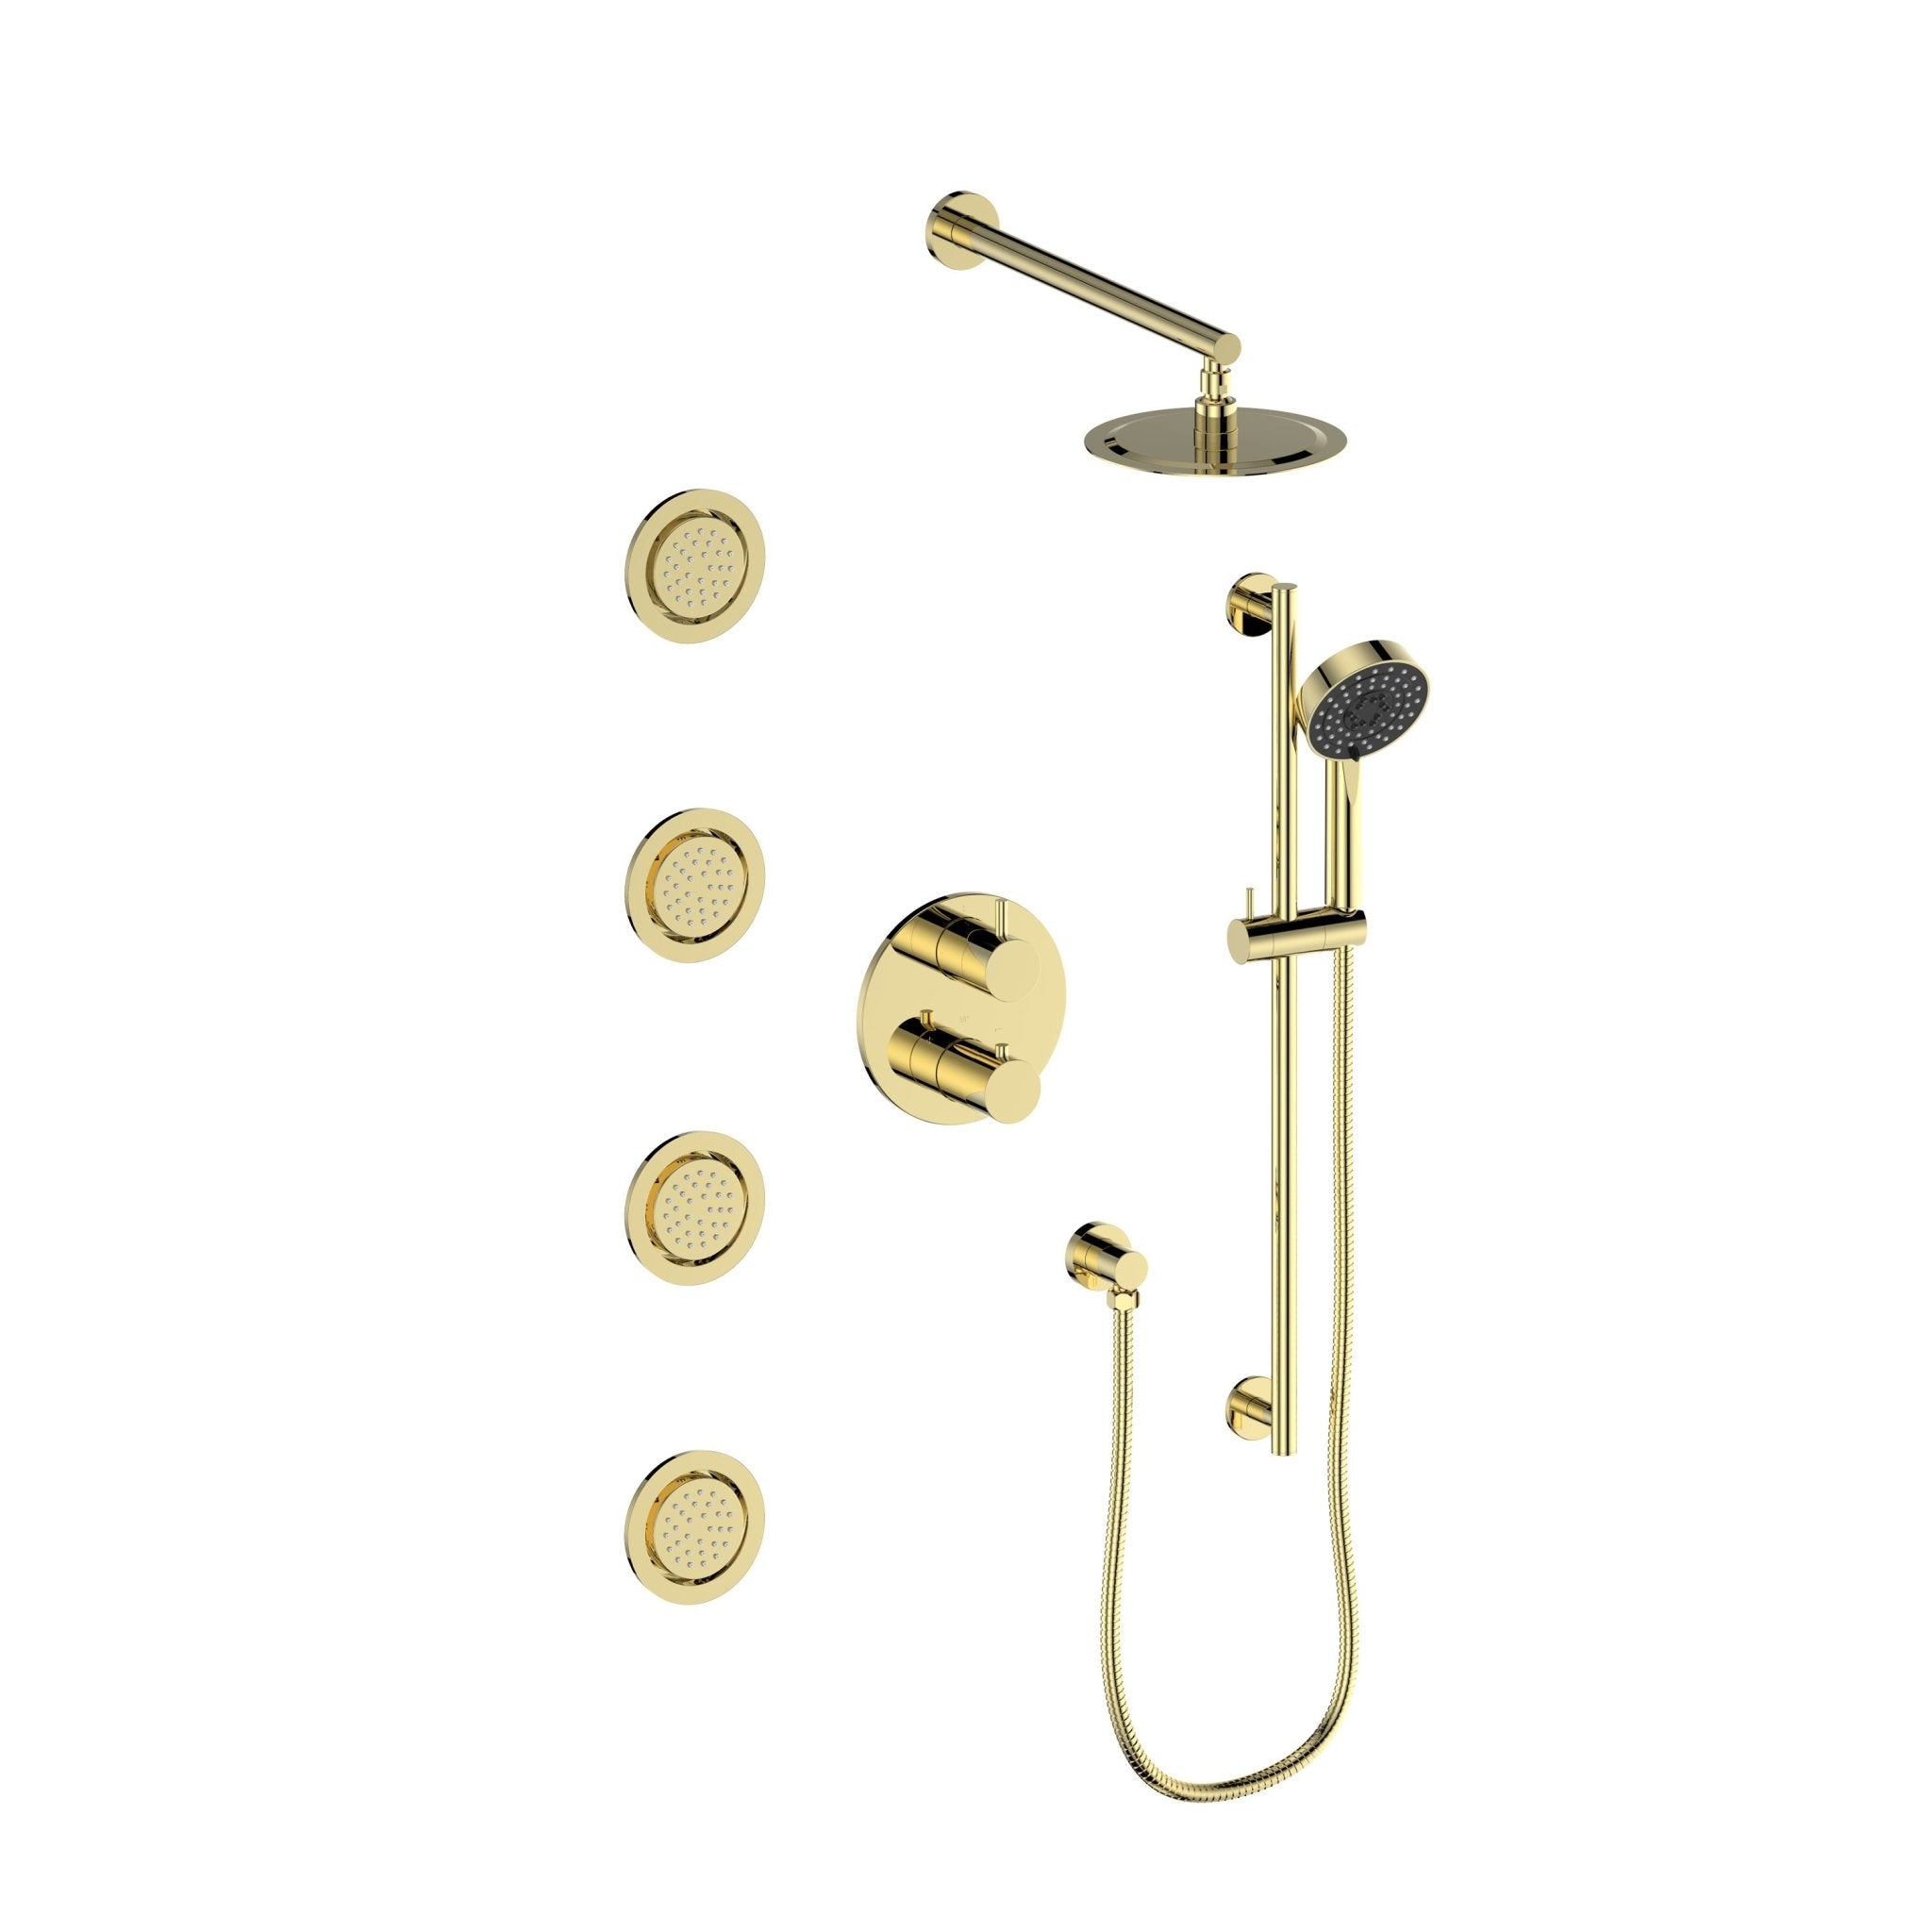 ZLINE Emerald Bay Thermostatic Shower System with Body Jets (EMBY-SHS-T3) in polished gold